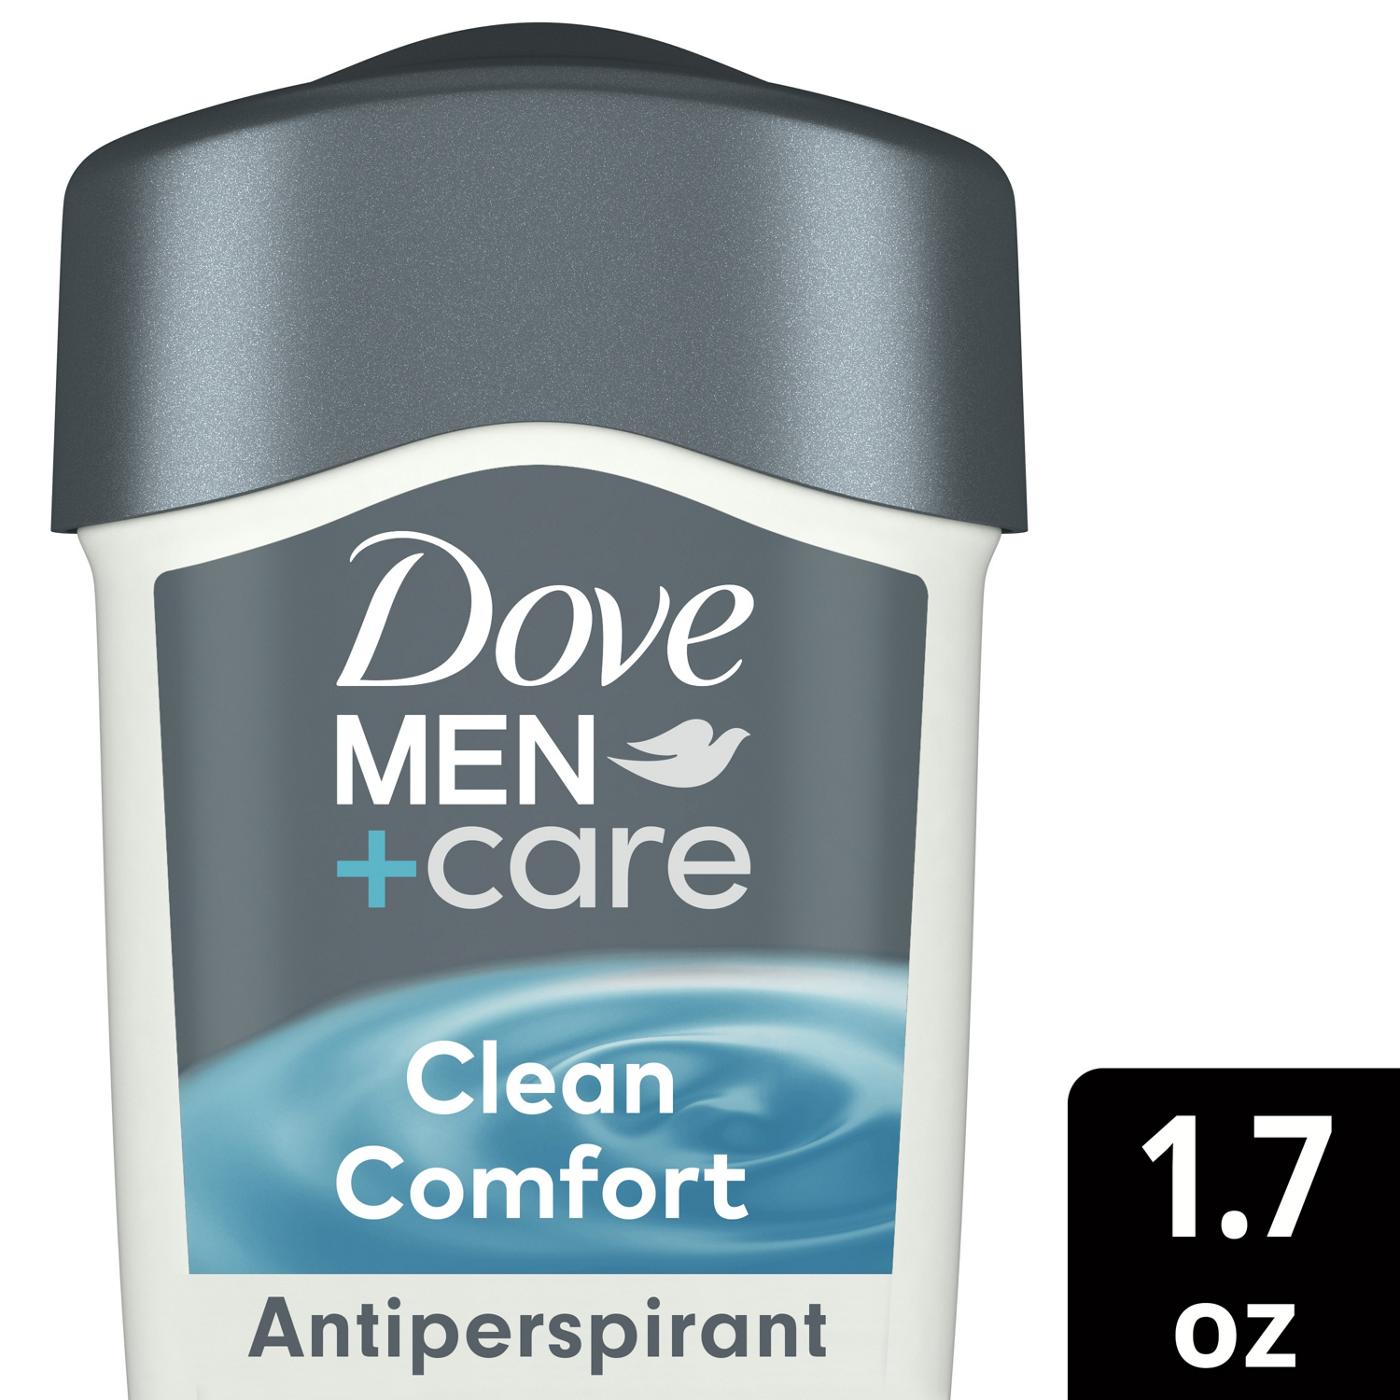 Dove Men+Care Clinical Protection Antiperspirant - Clean Comfort; image 3 of 7